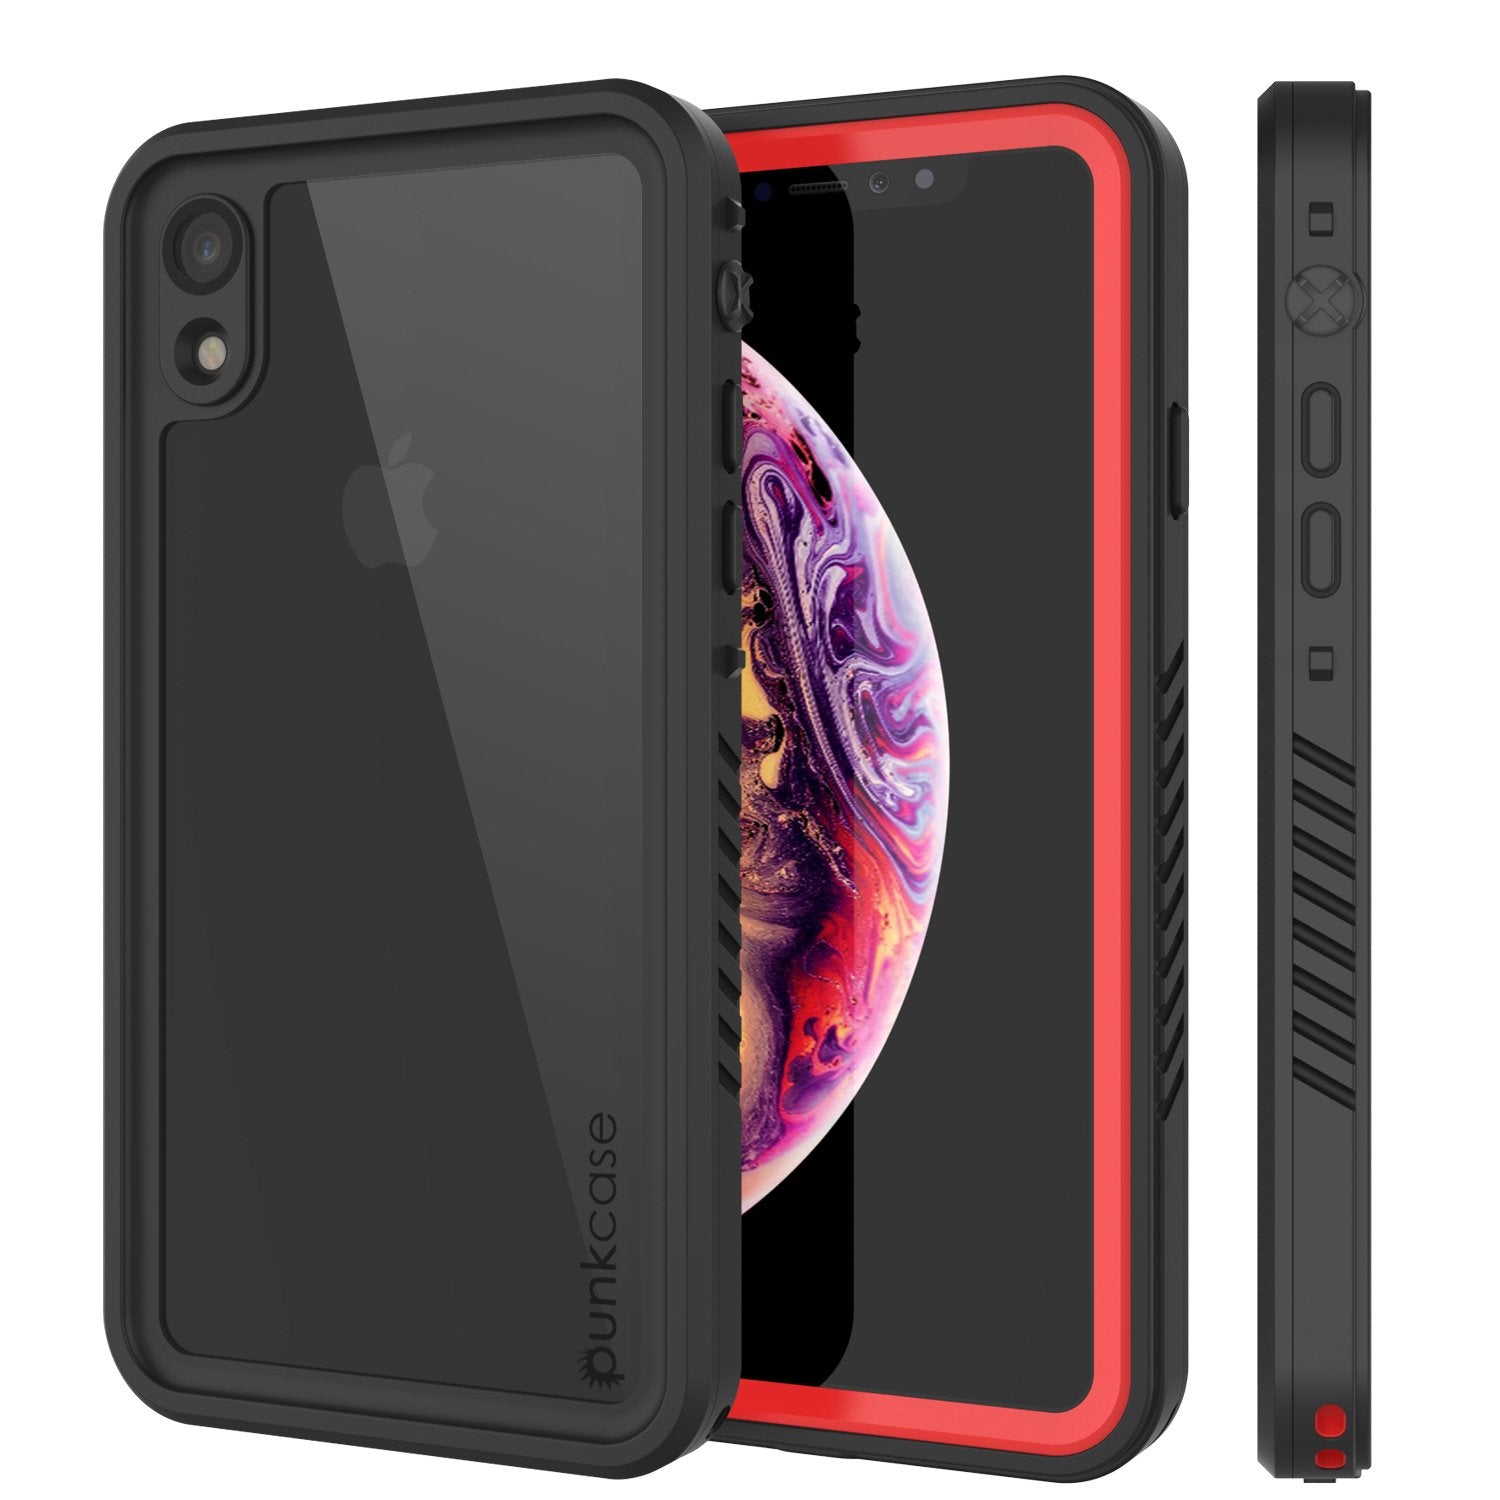 iPhone XR Waterproof Case, Punkcase [Extreme Series] Armor Cover W/ Built In Screen Protector [Red] (Color in image: Red)